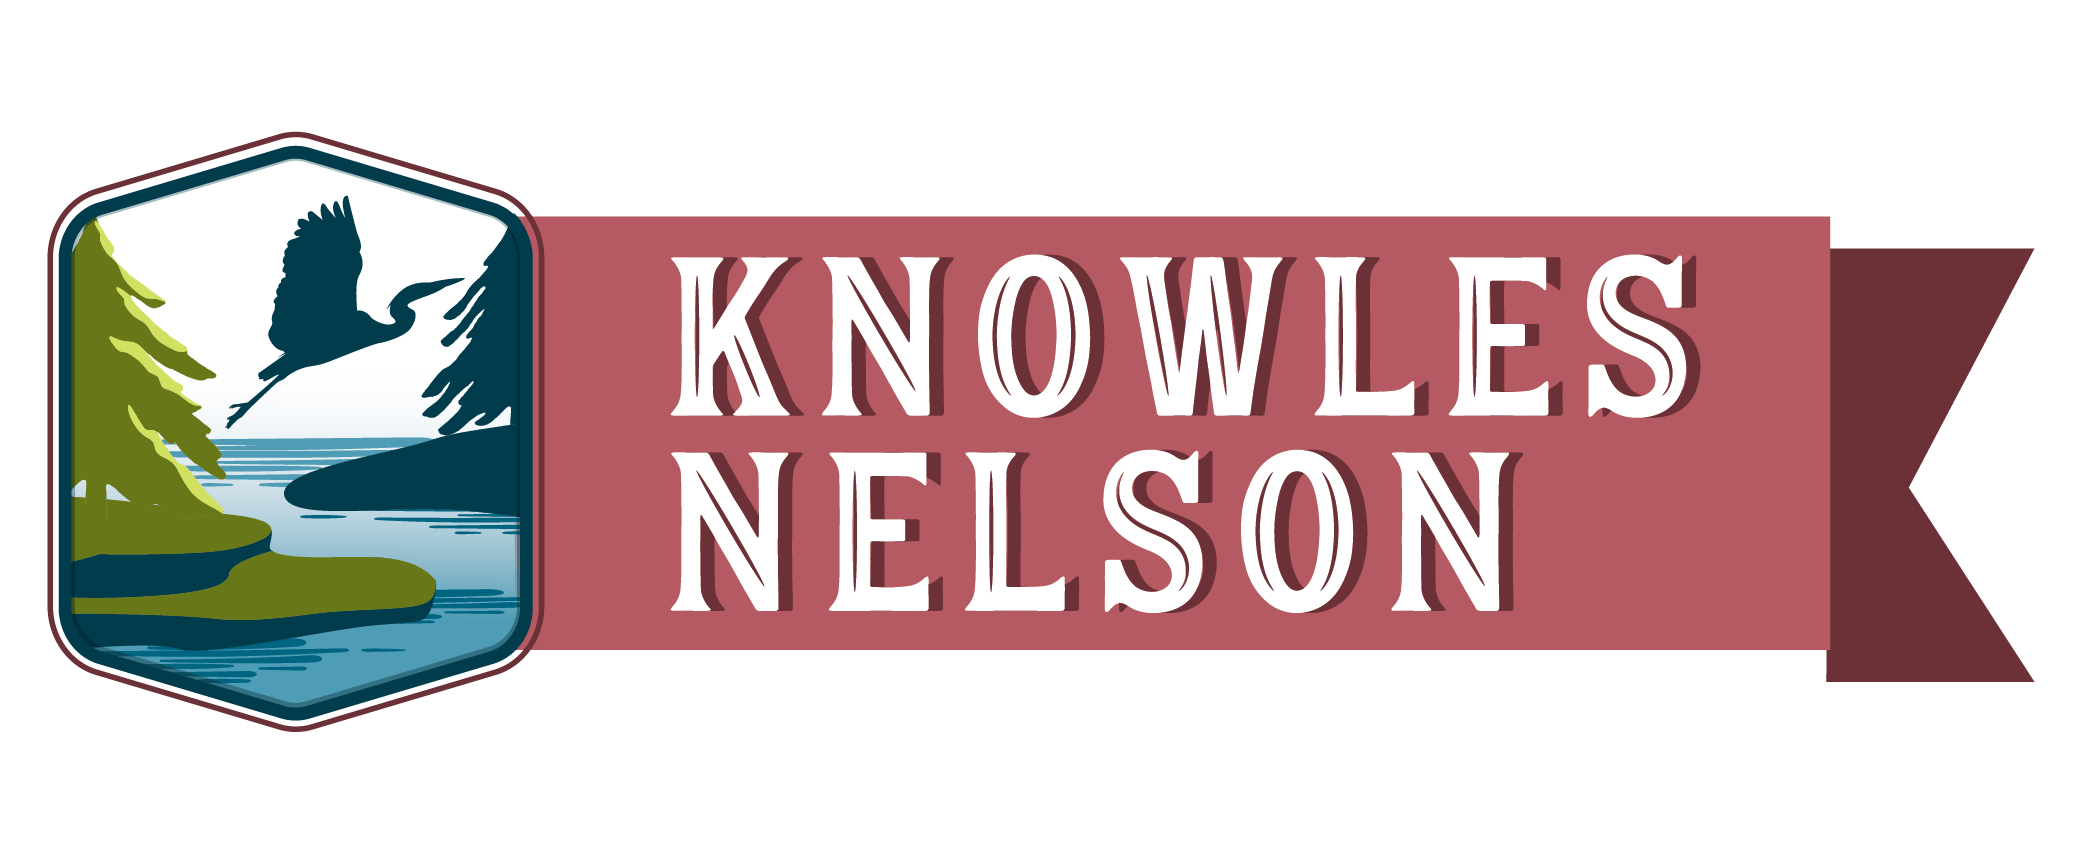 Take action to support Knowles-Nelson!